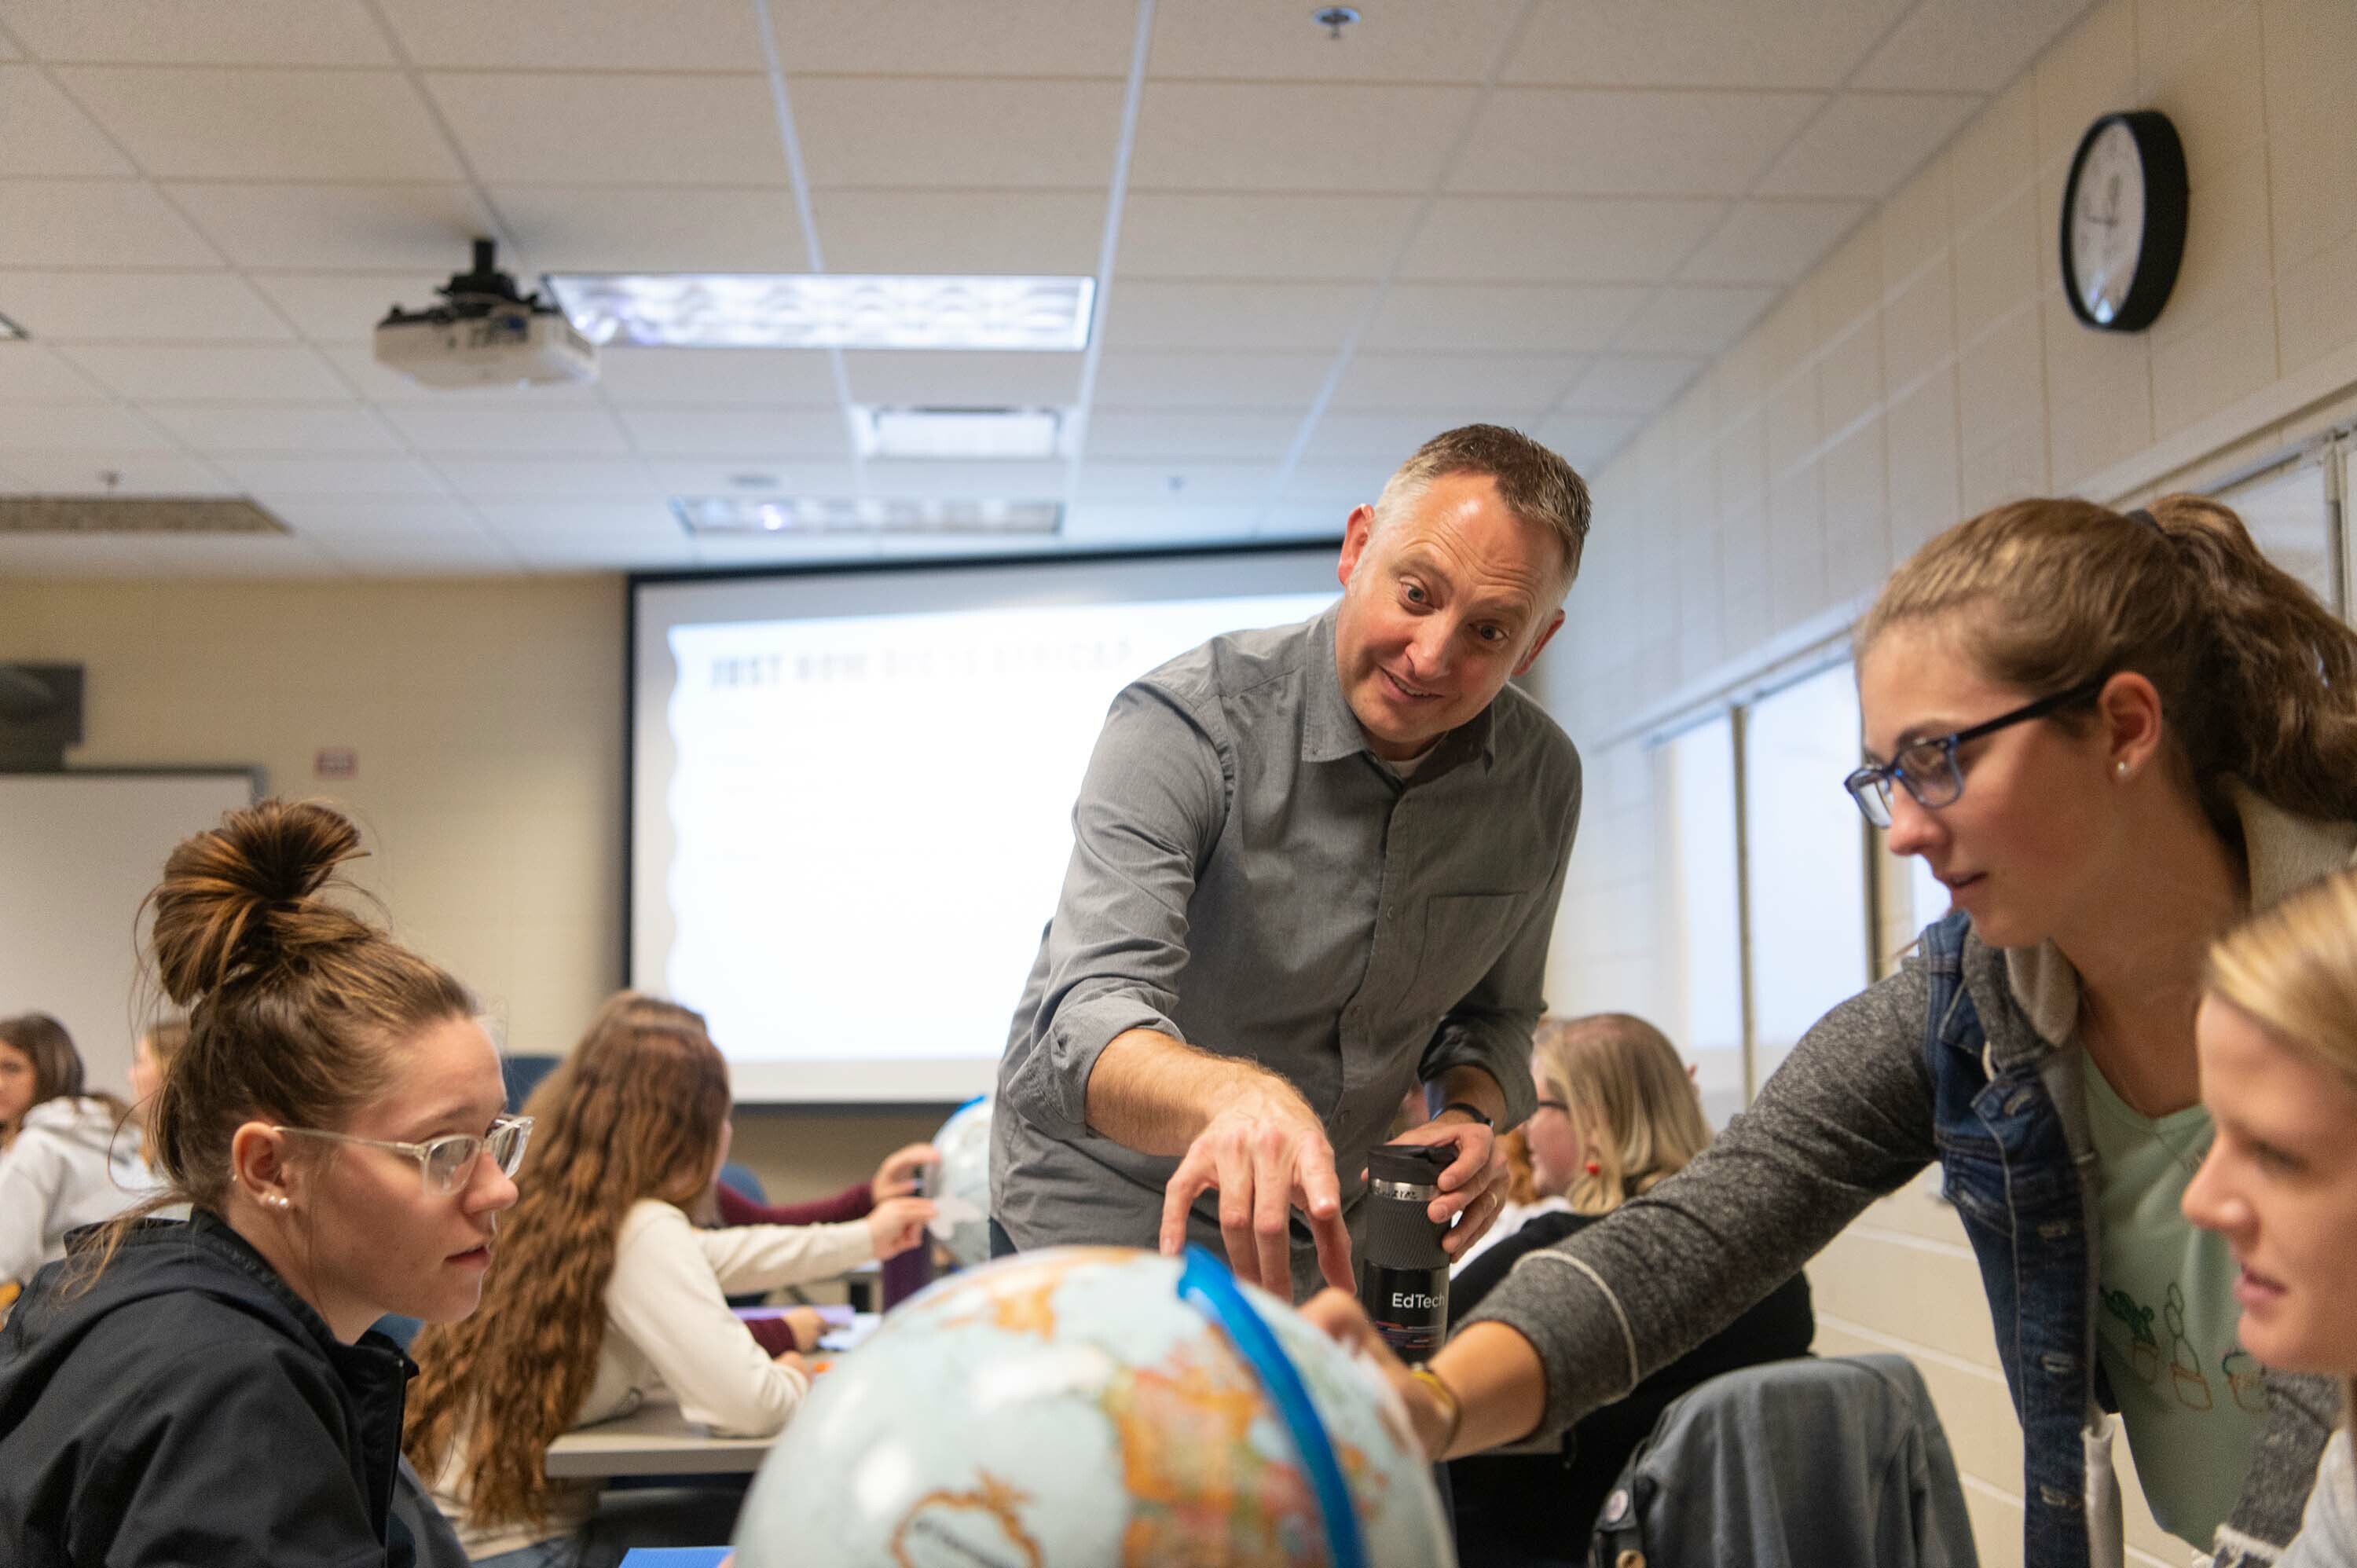 A Dordt professor points to a globe as Dordt students at a table look on